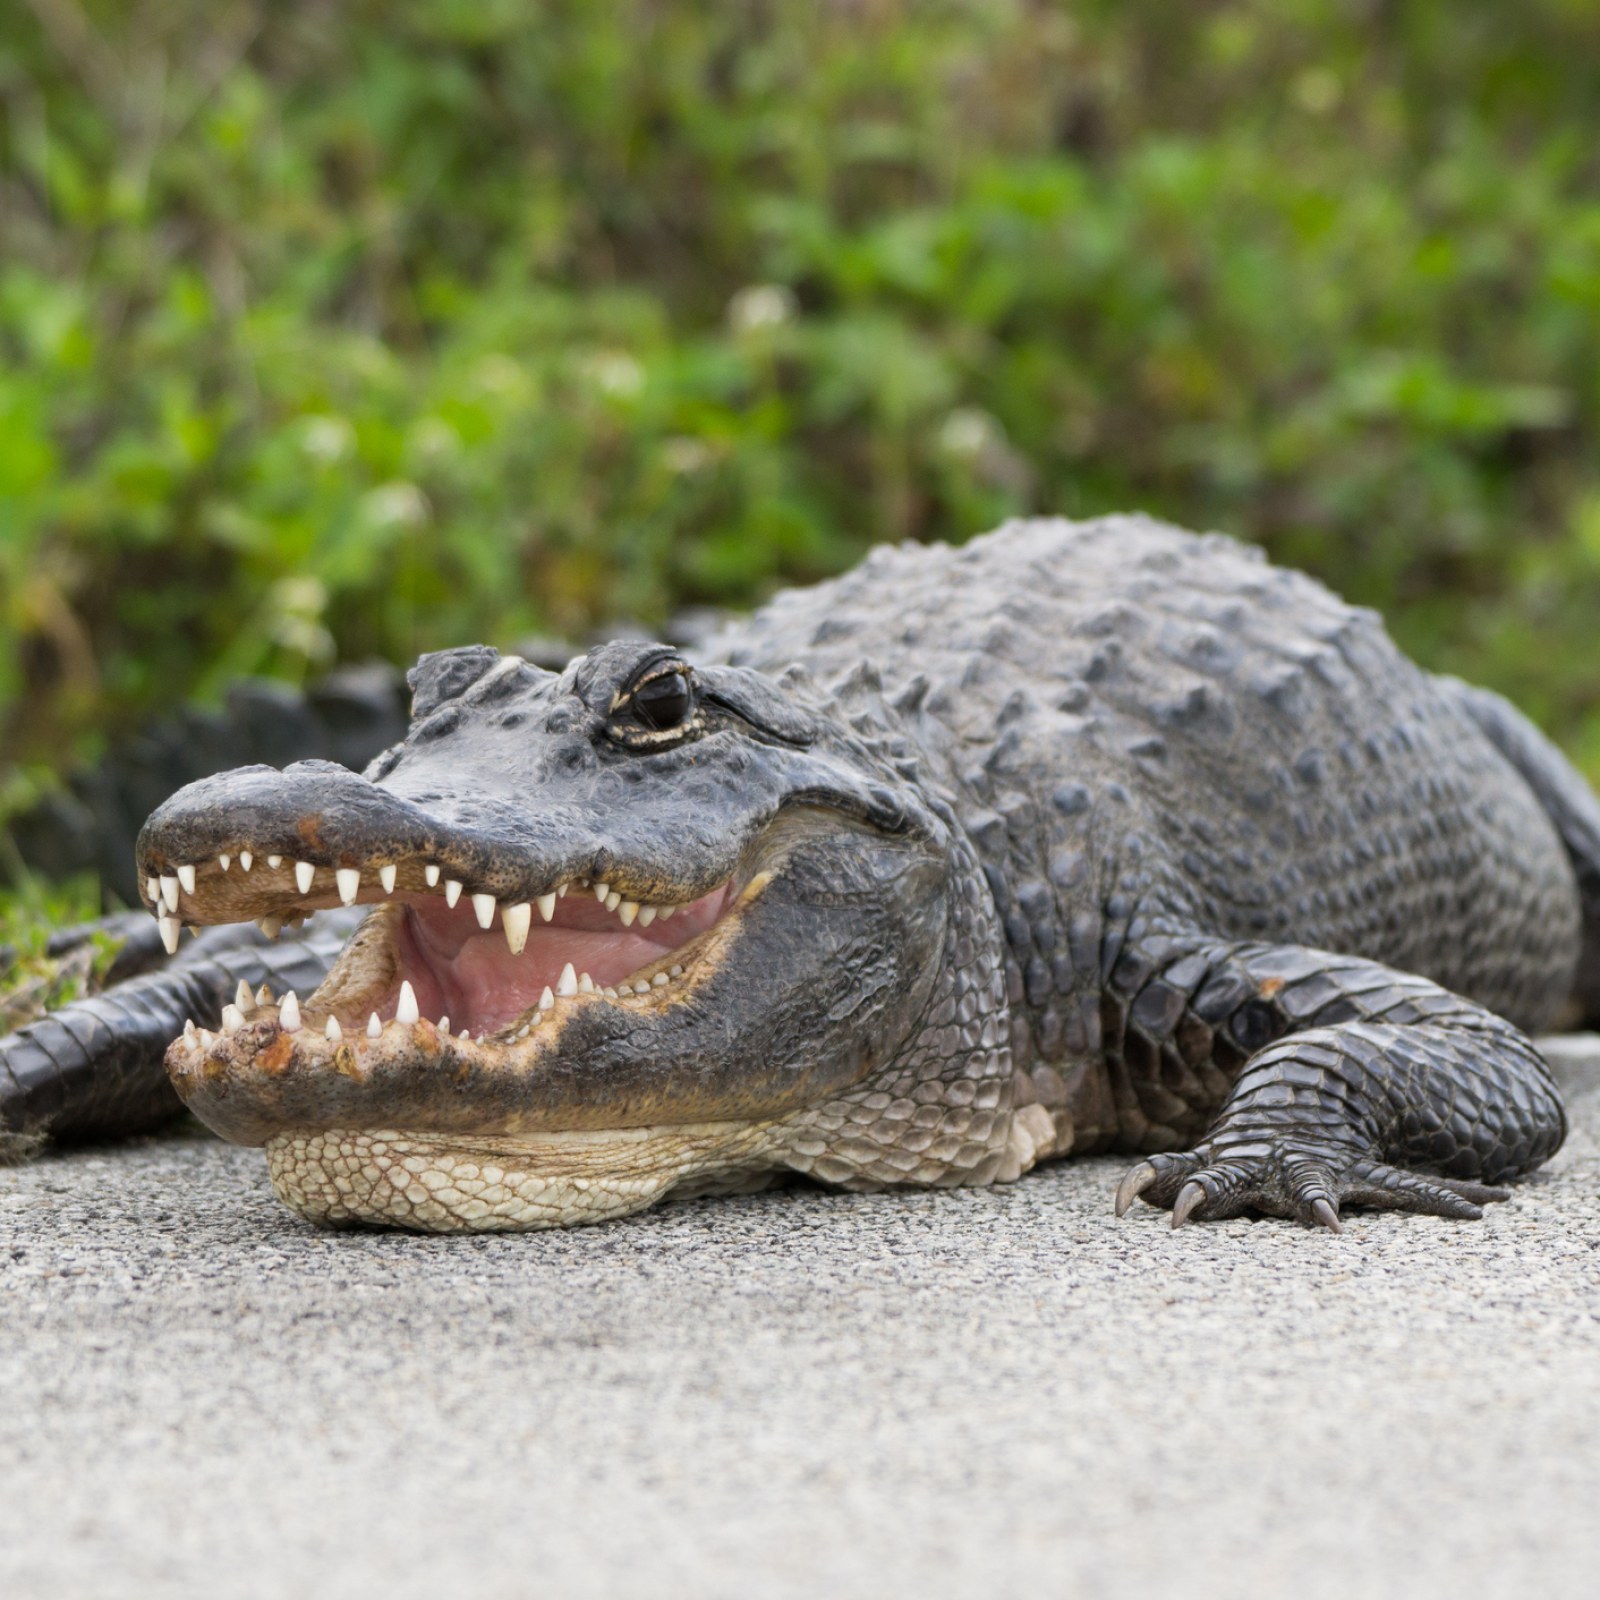 Teen Tourists That Captured Alligator told Police They Were 'Bored'